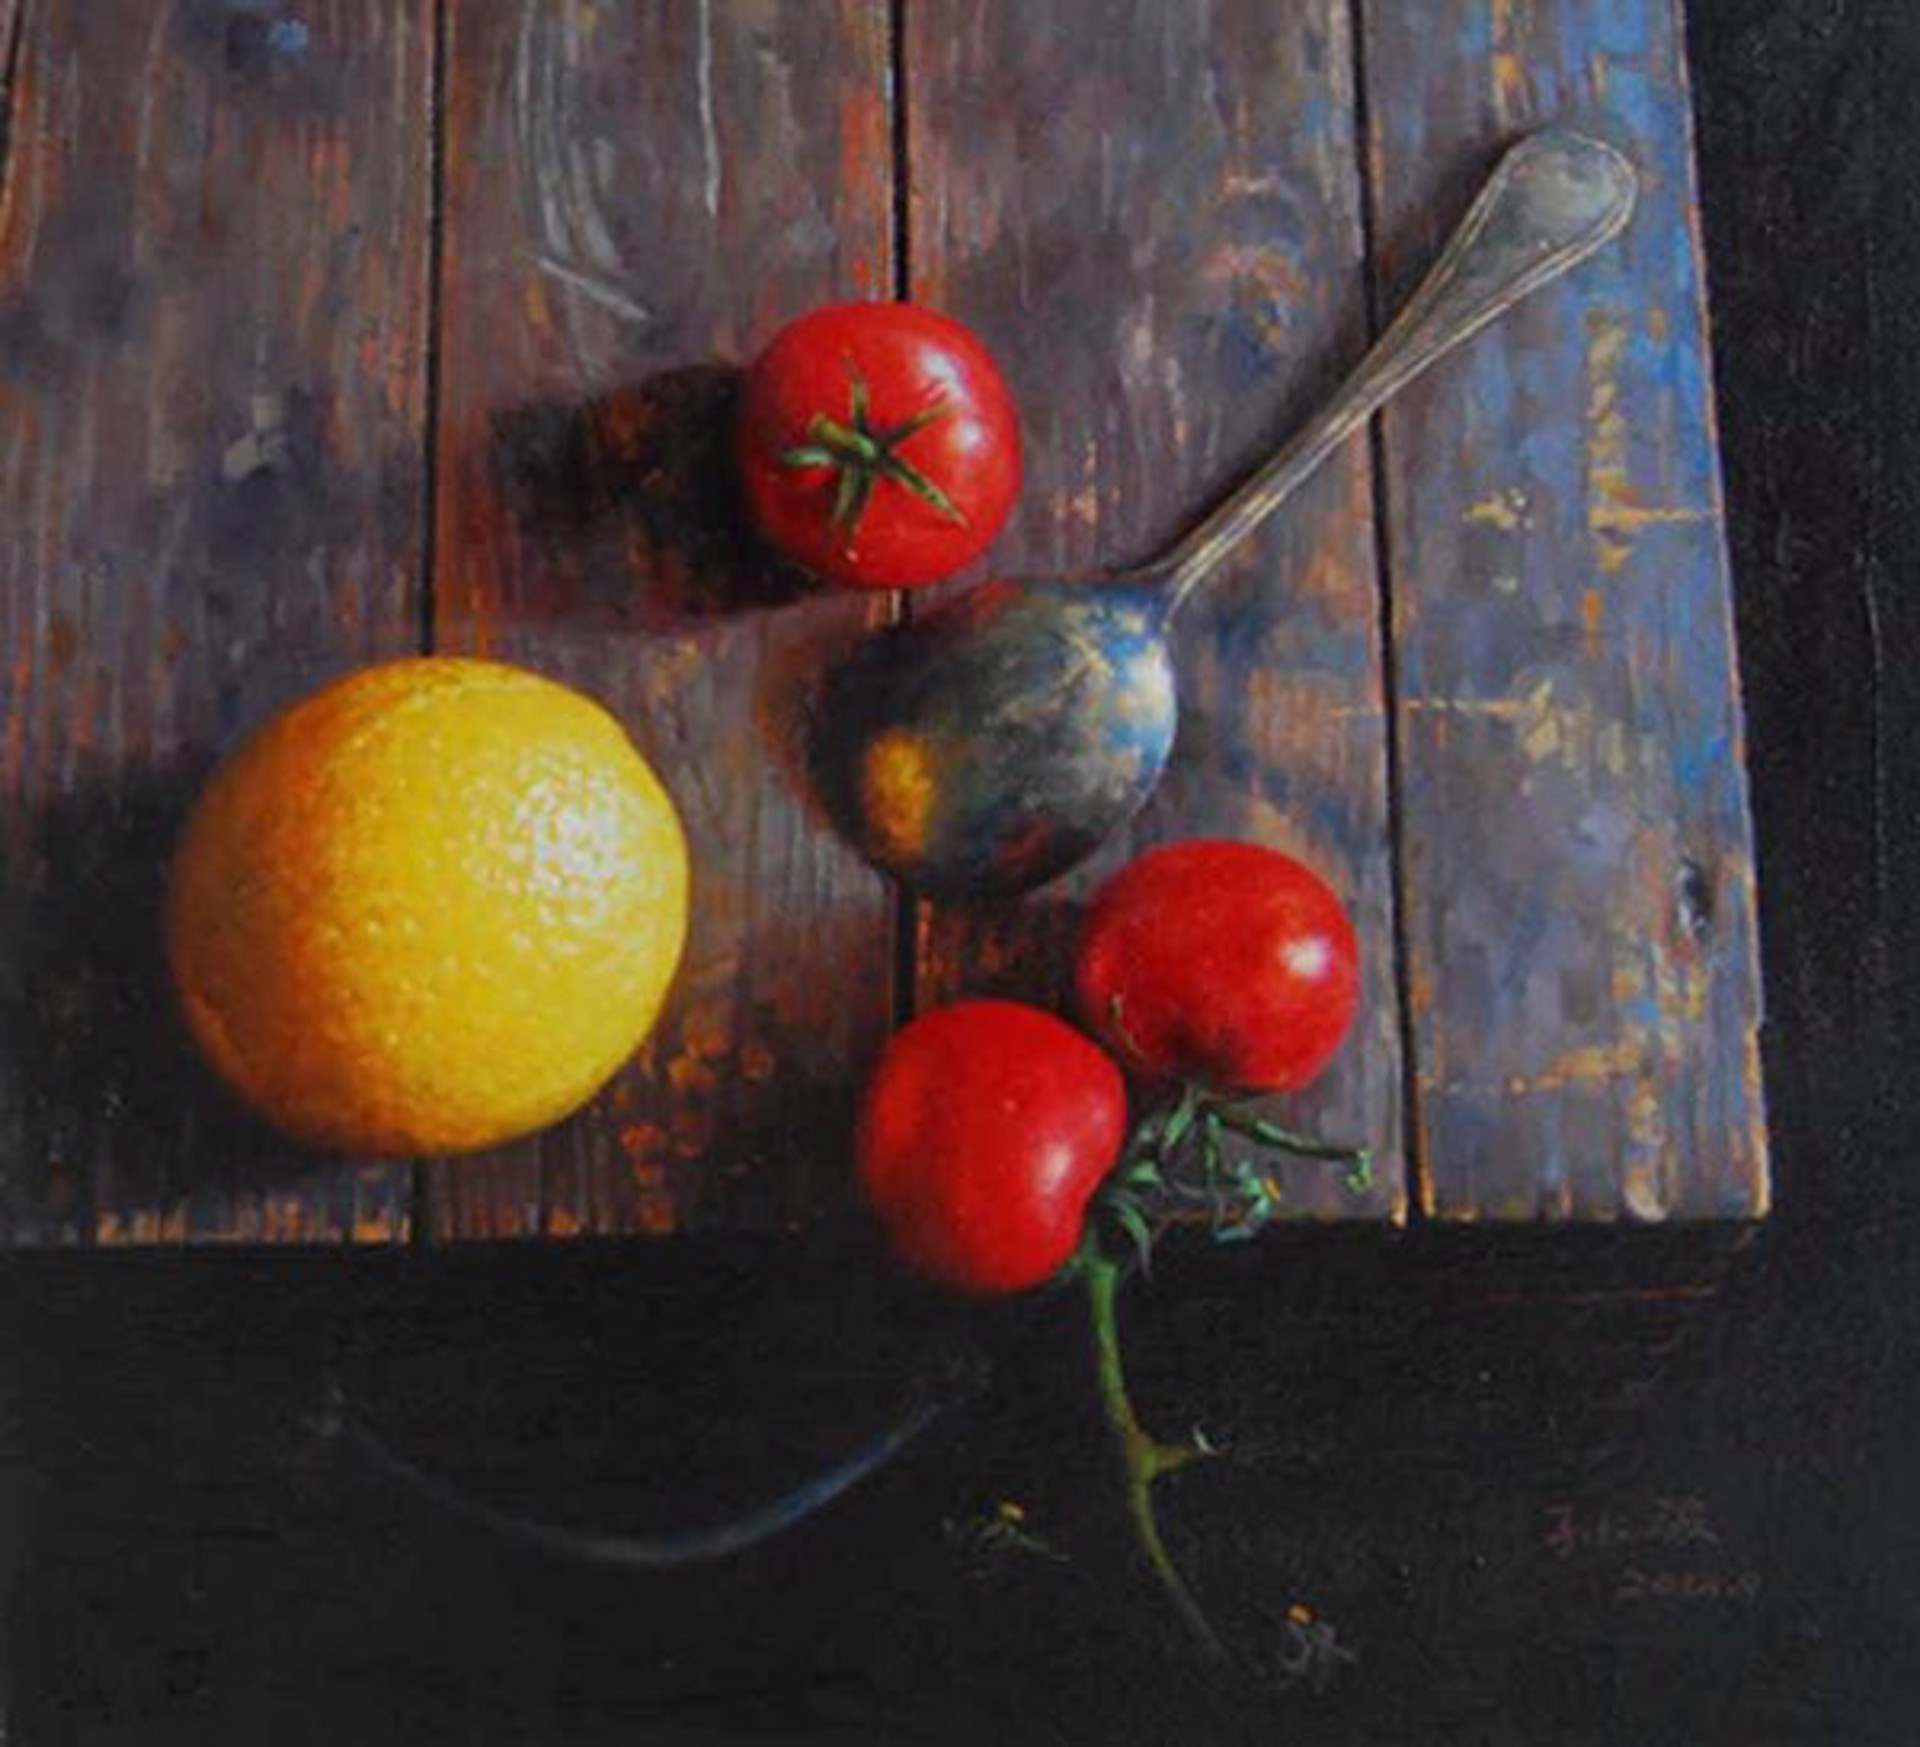 Tomatoes on Wooden Crate by Sun Jun